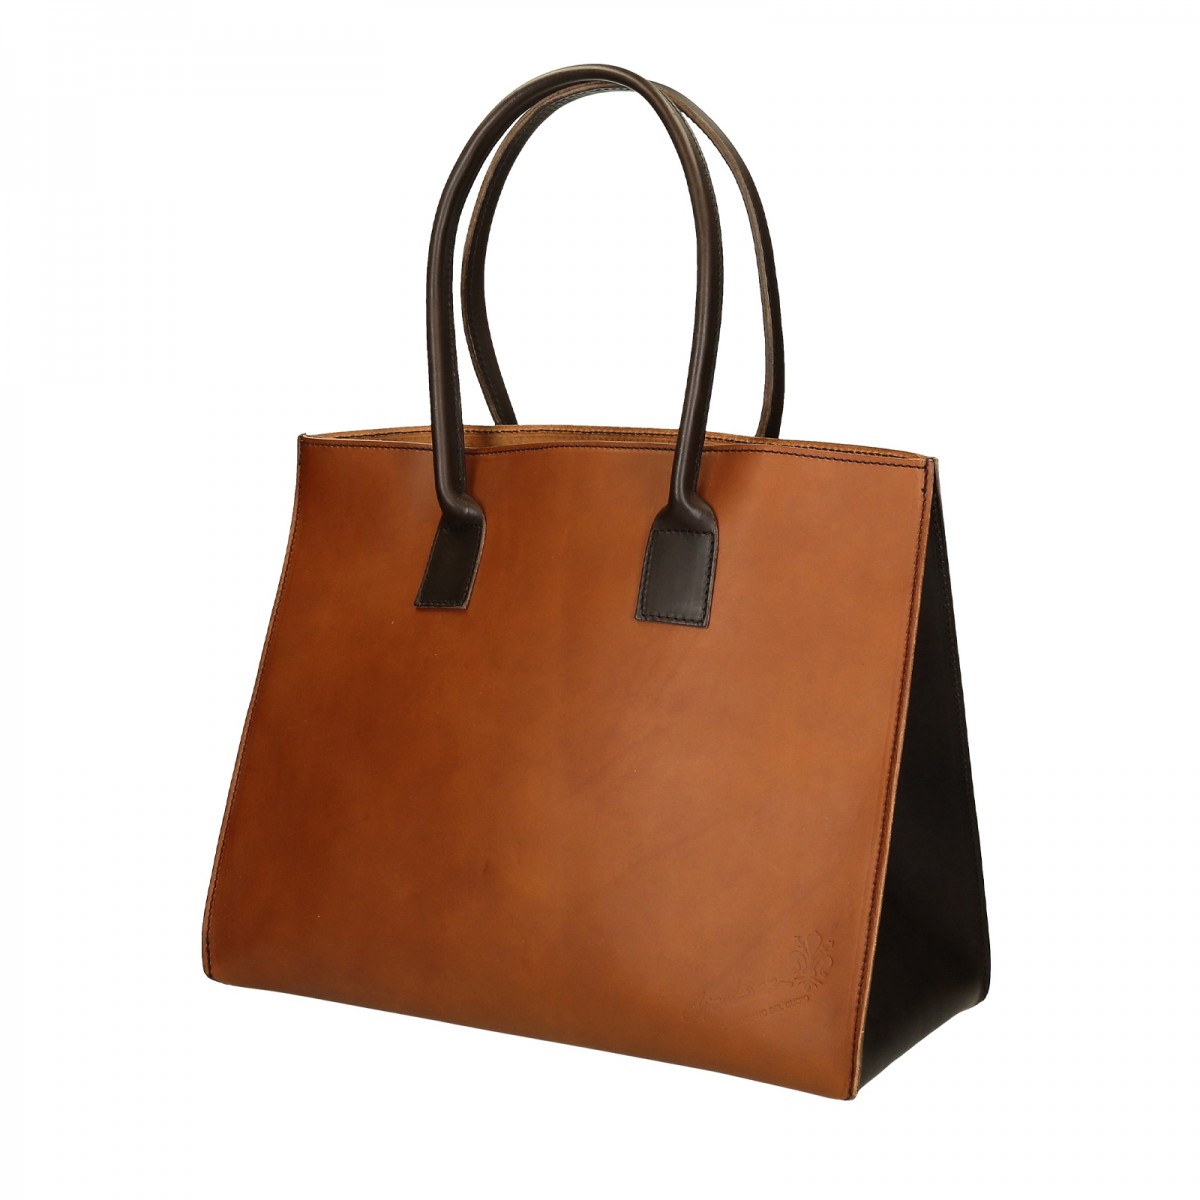 Tote bag for women Handmade in two tone leather | Gianluca - The leather craftsman